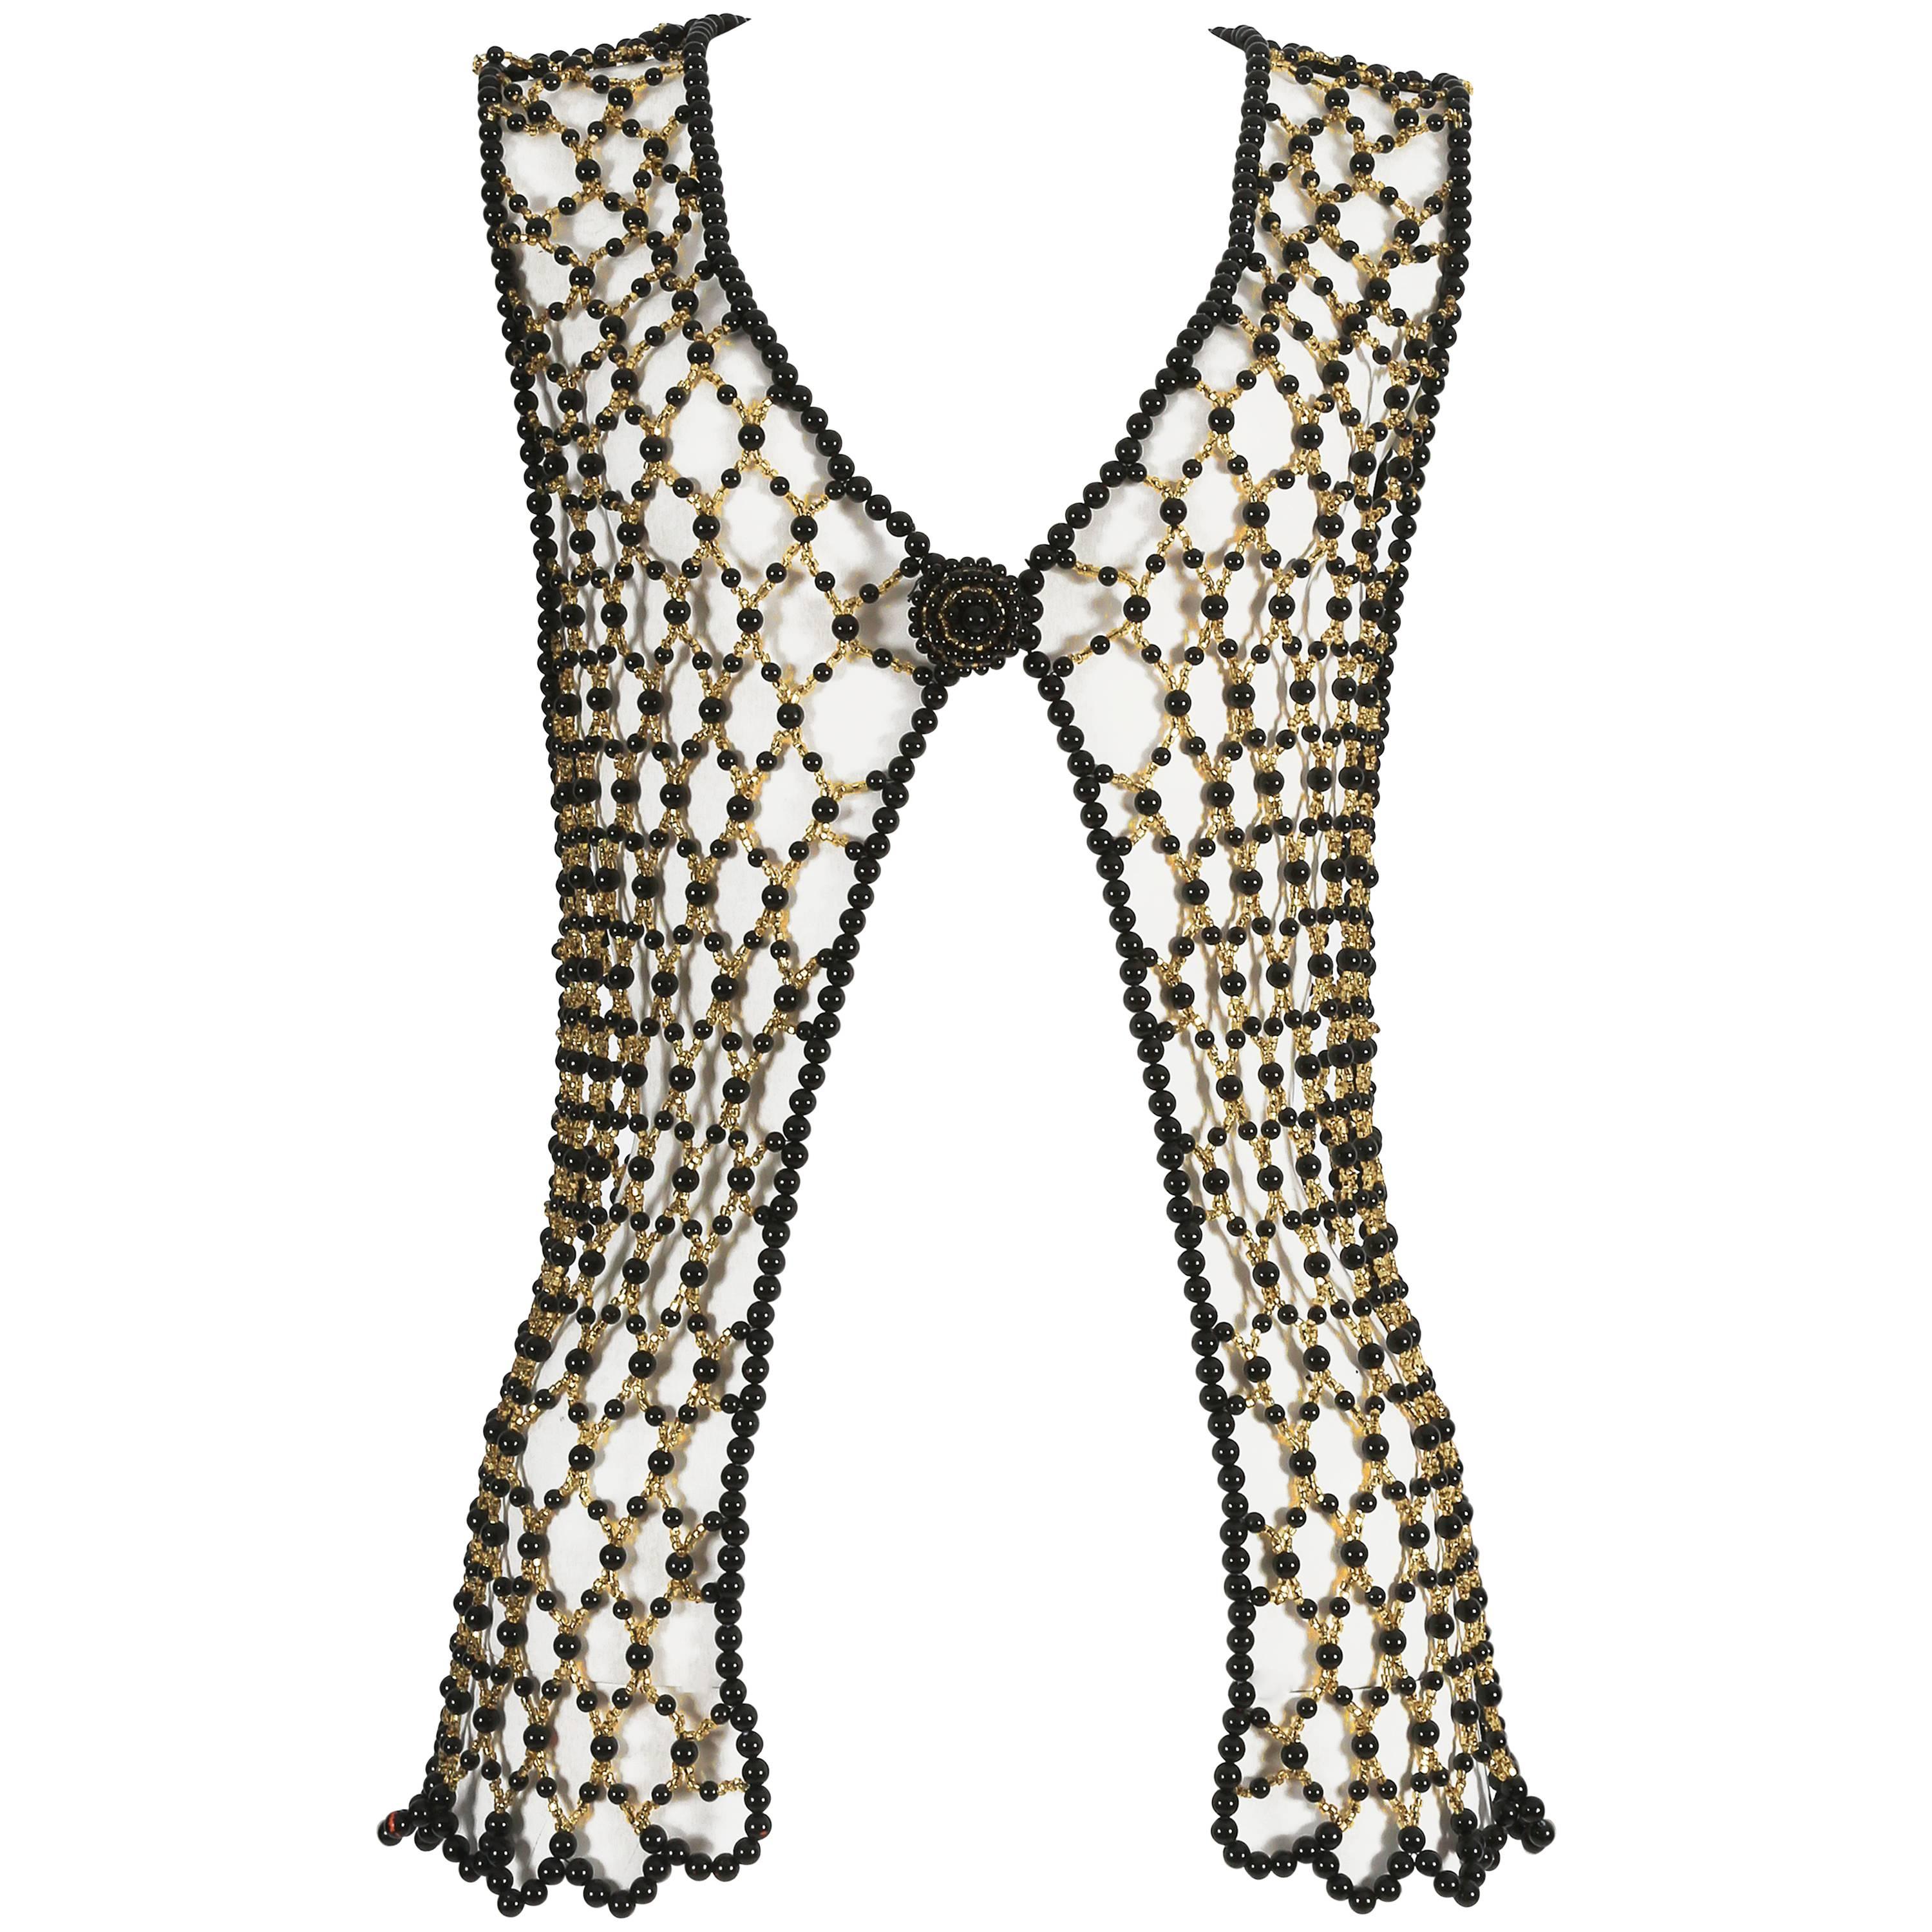 Black and gold beaded net evening gillet, circa 1960s